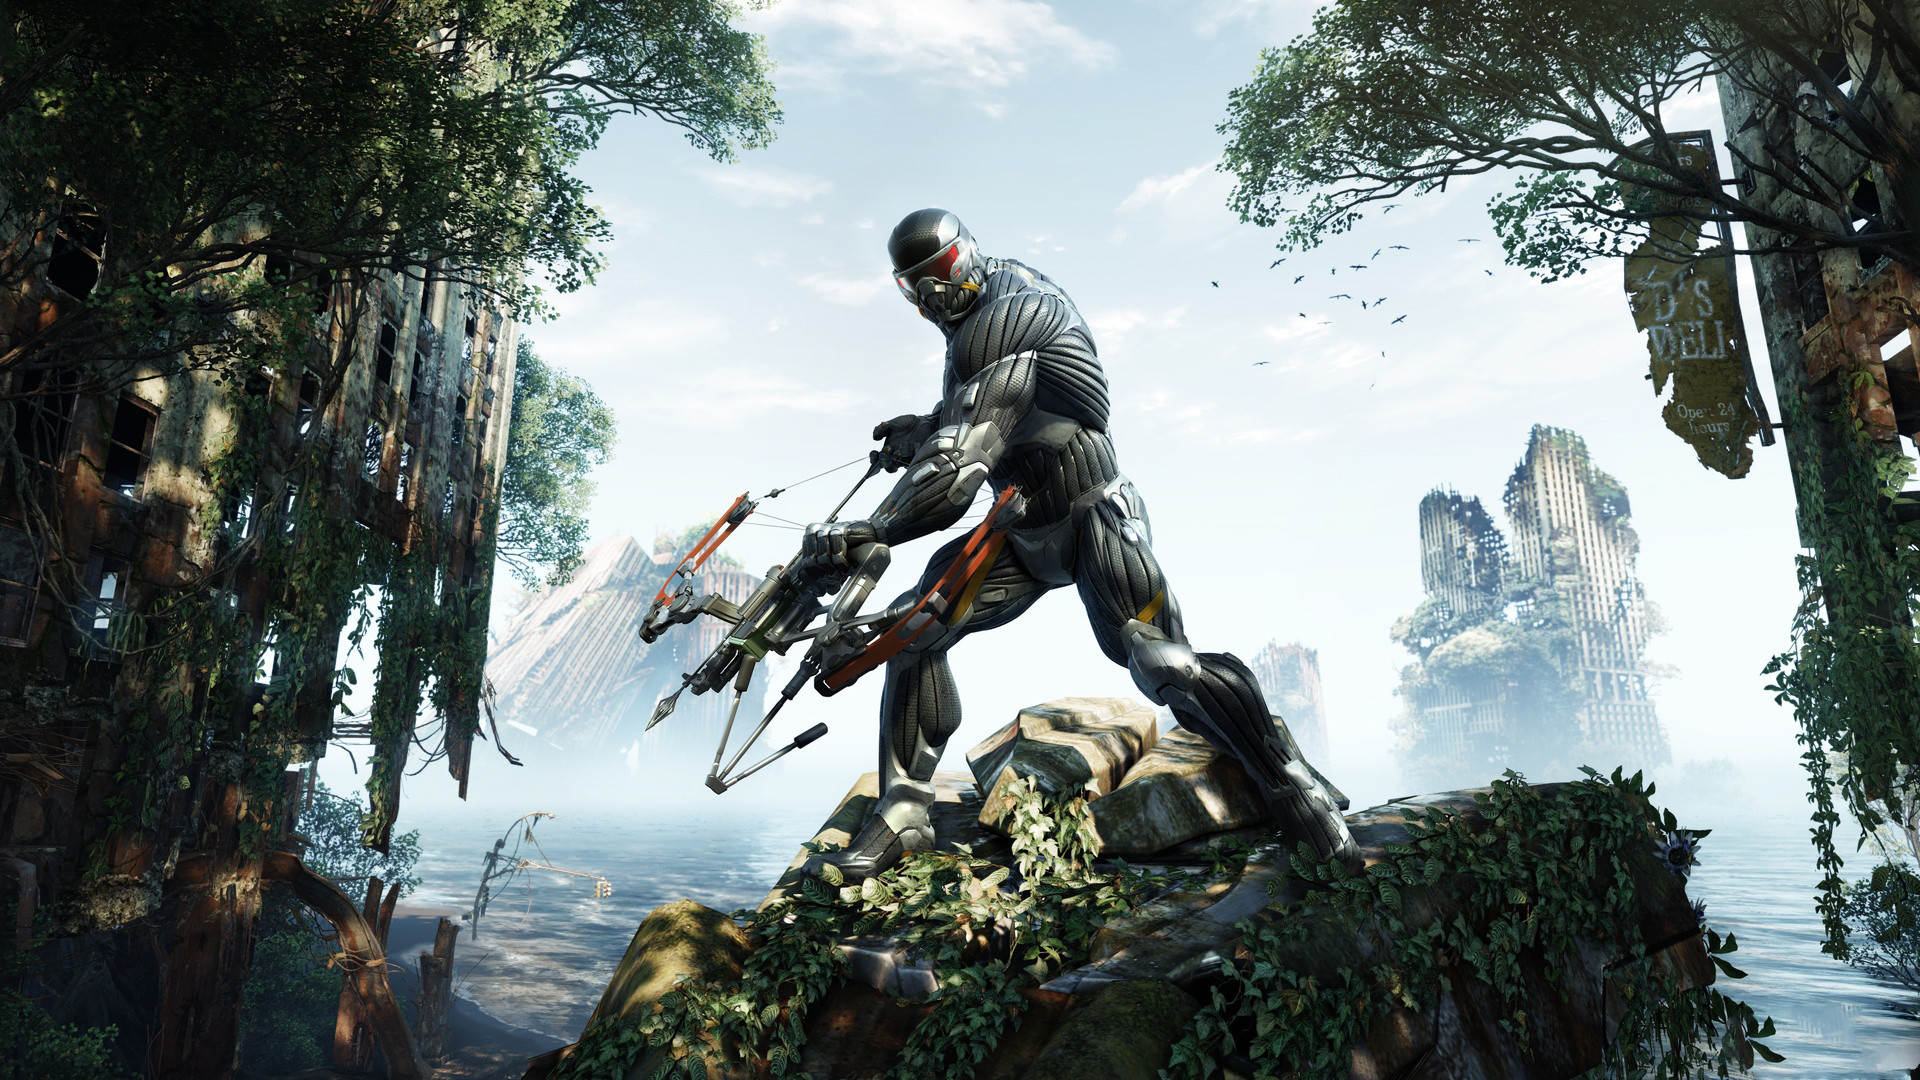 No Crysis 3 for Wii U, Surprised or Shocked?